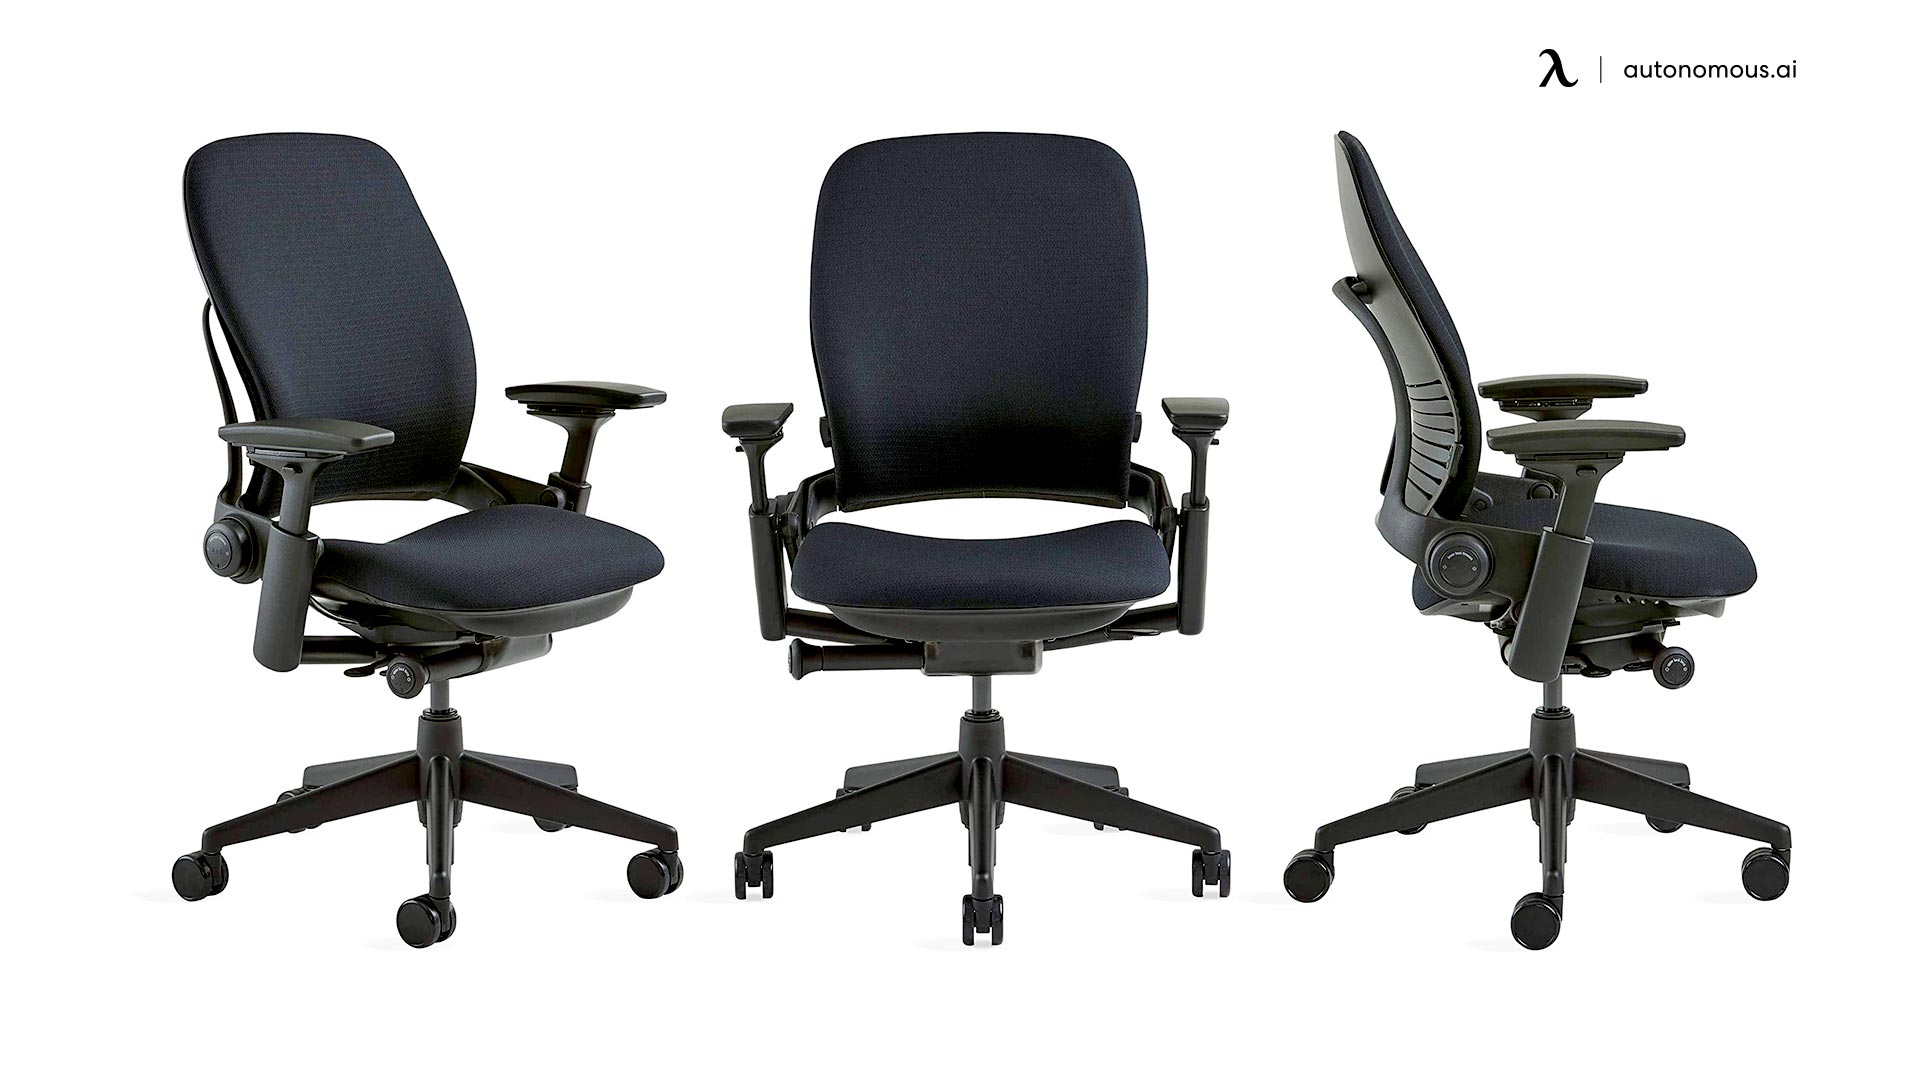 Steelcase Leap Black Friday computer chair